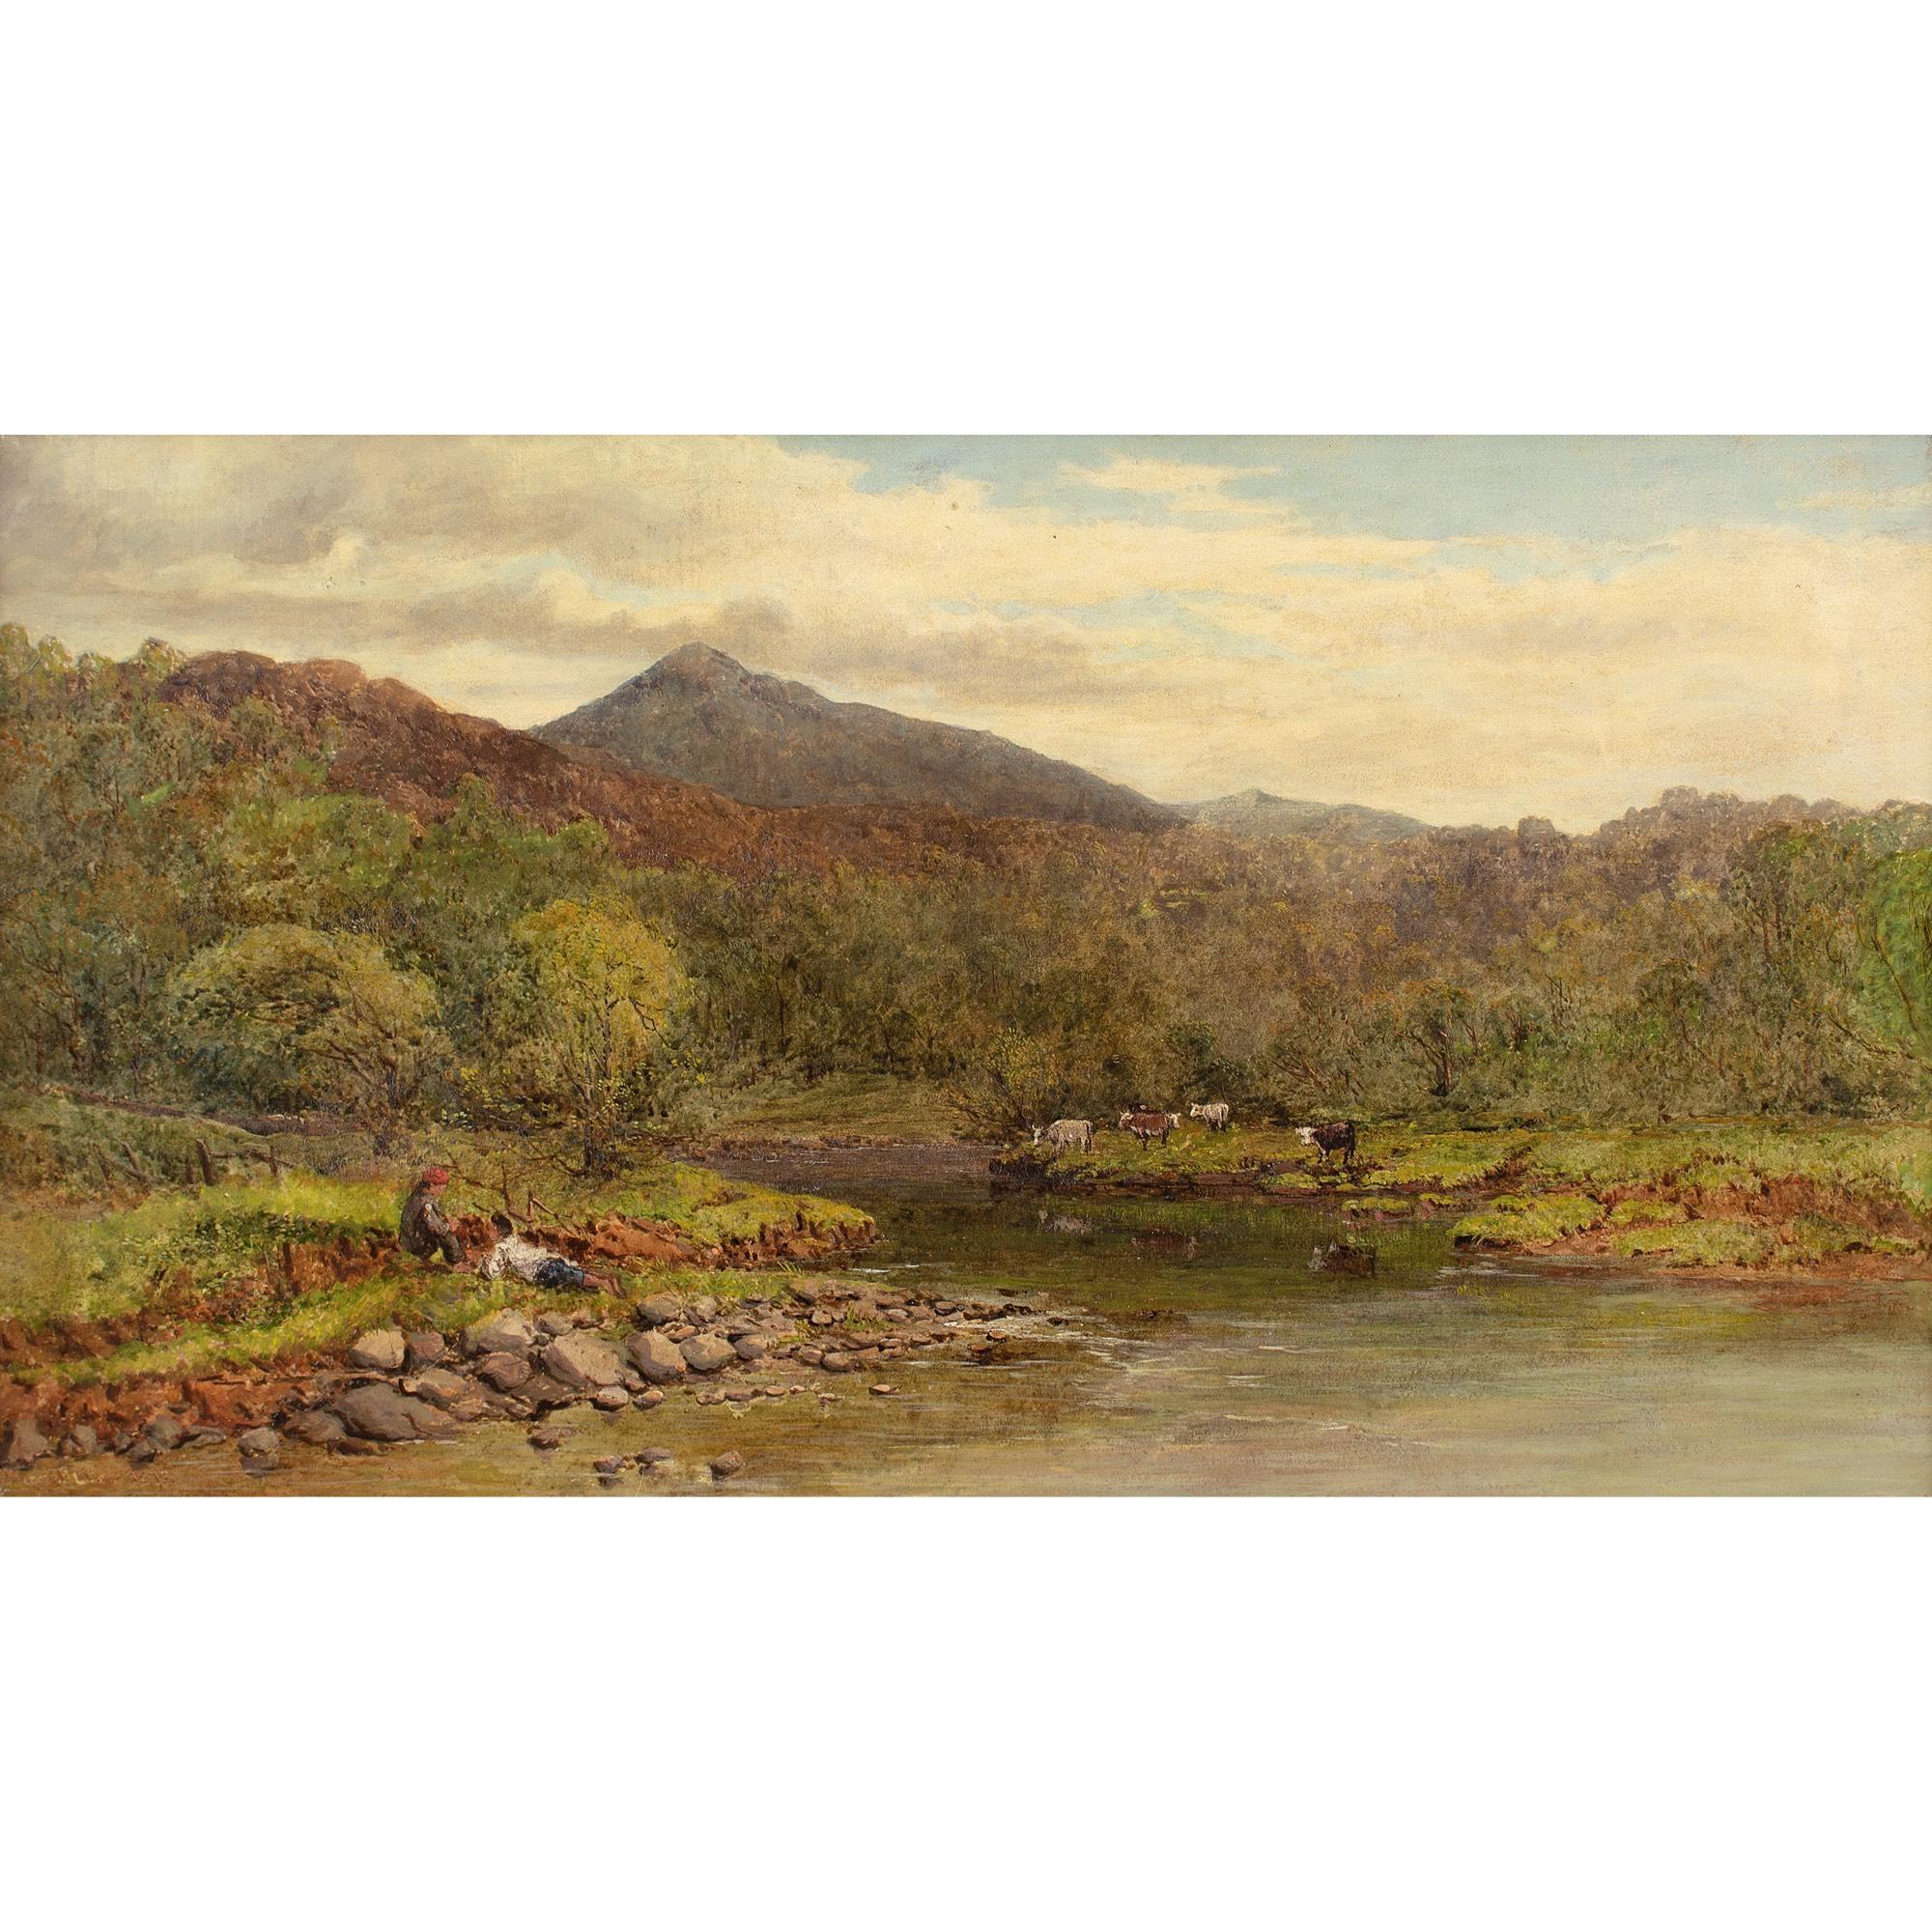 Rosa Müller, Moel Siabod From The Llugwy River, Snowdonia, North Wales For Sale 1